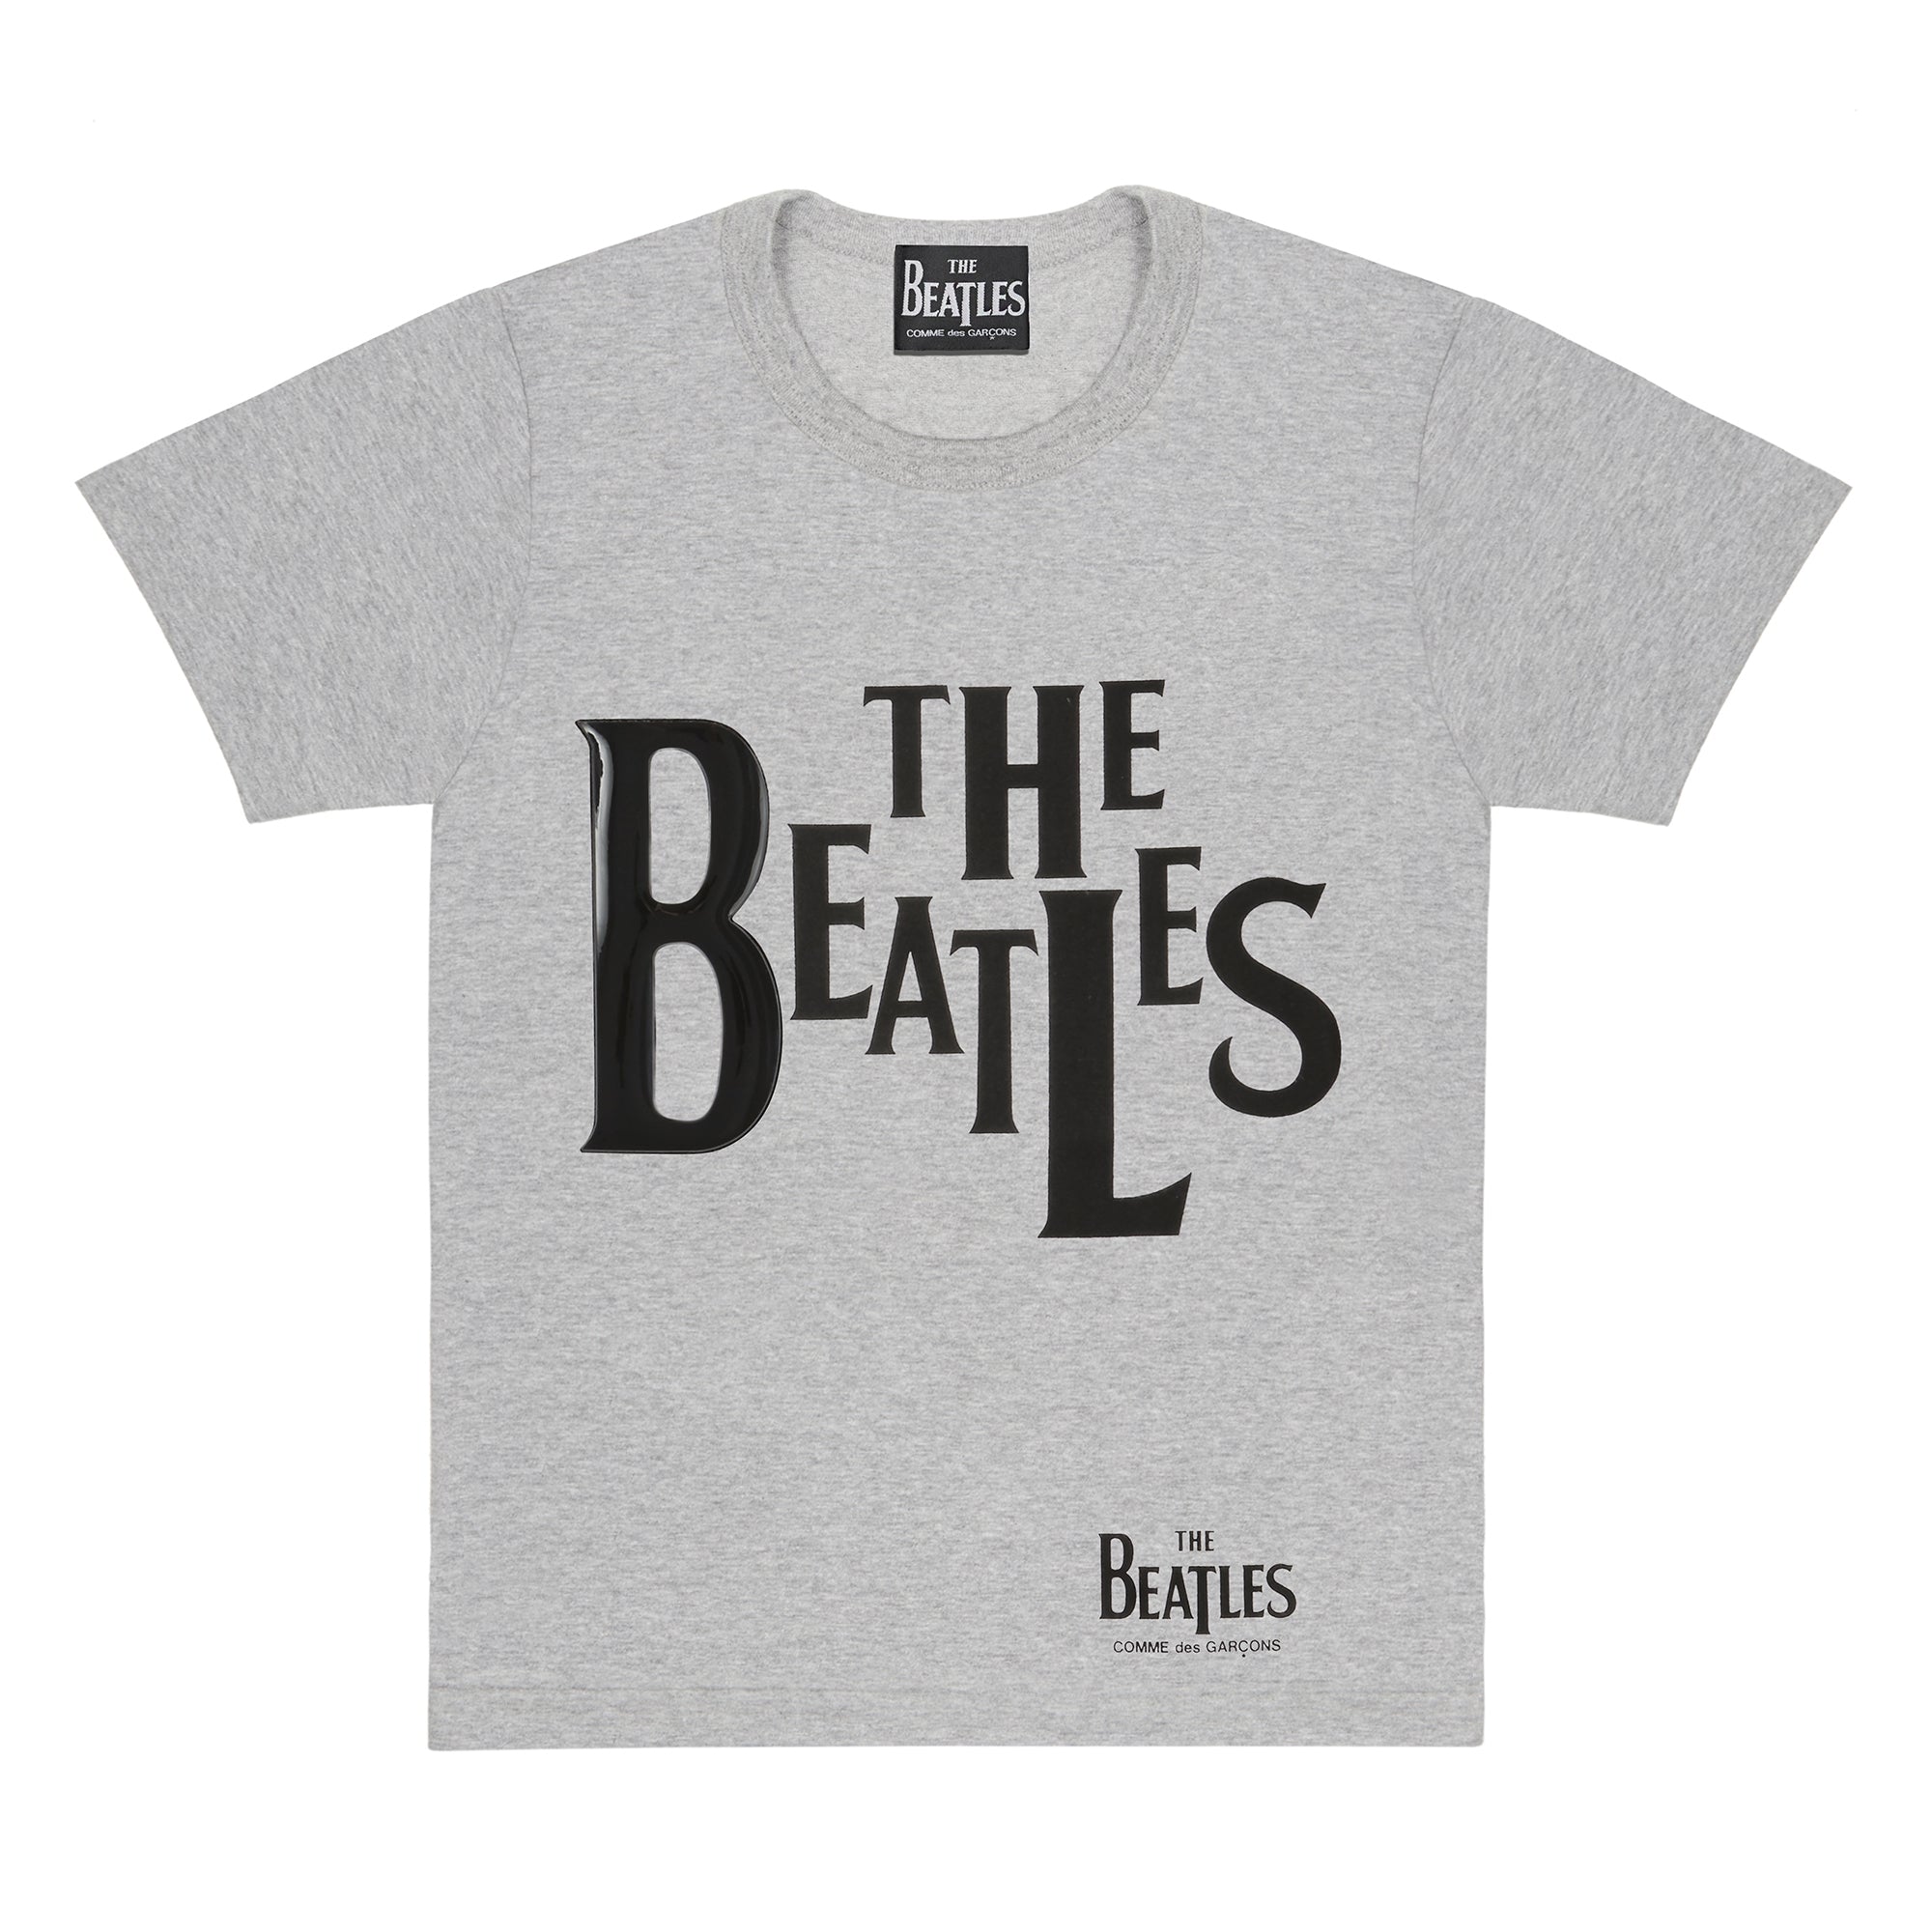 The Beatles CDG - Rubber Printed T-Shirt Grey - (VT-T002-051) view 1